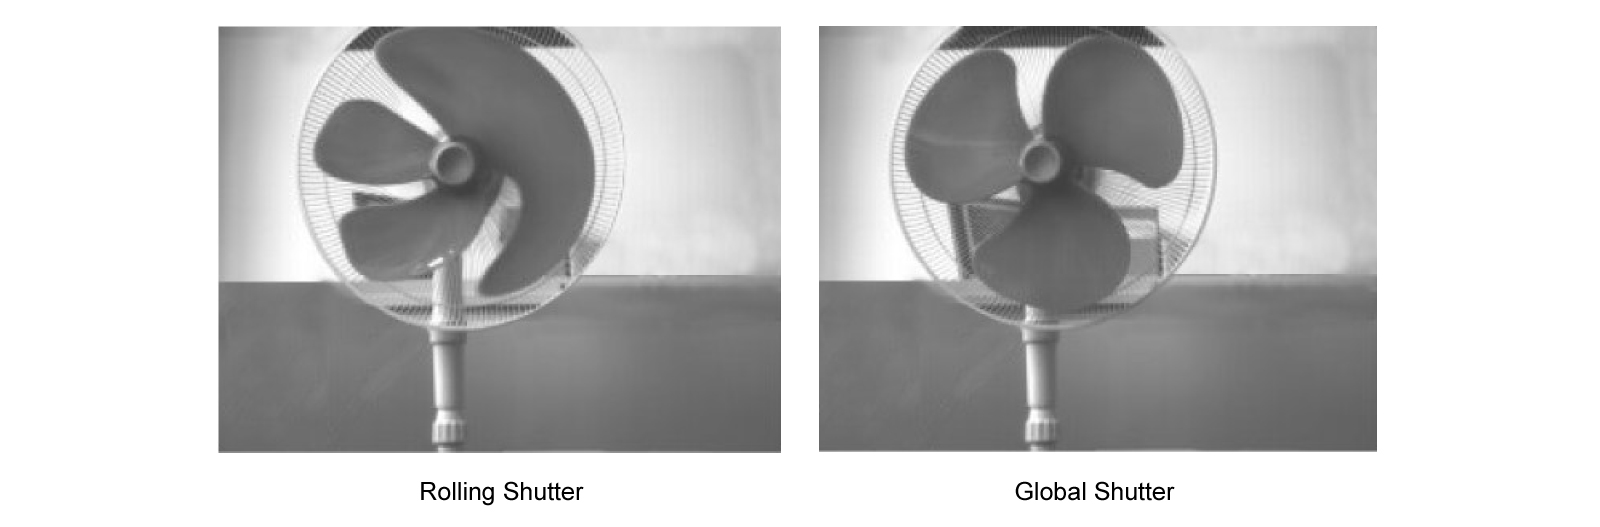 Global and Rolling Shutter